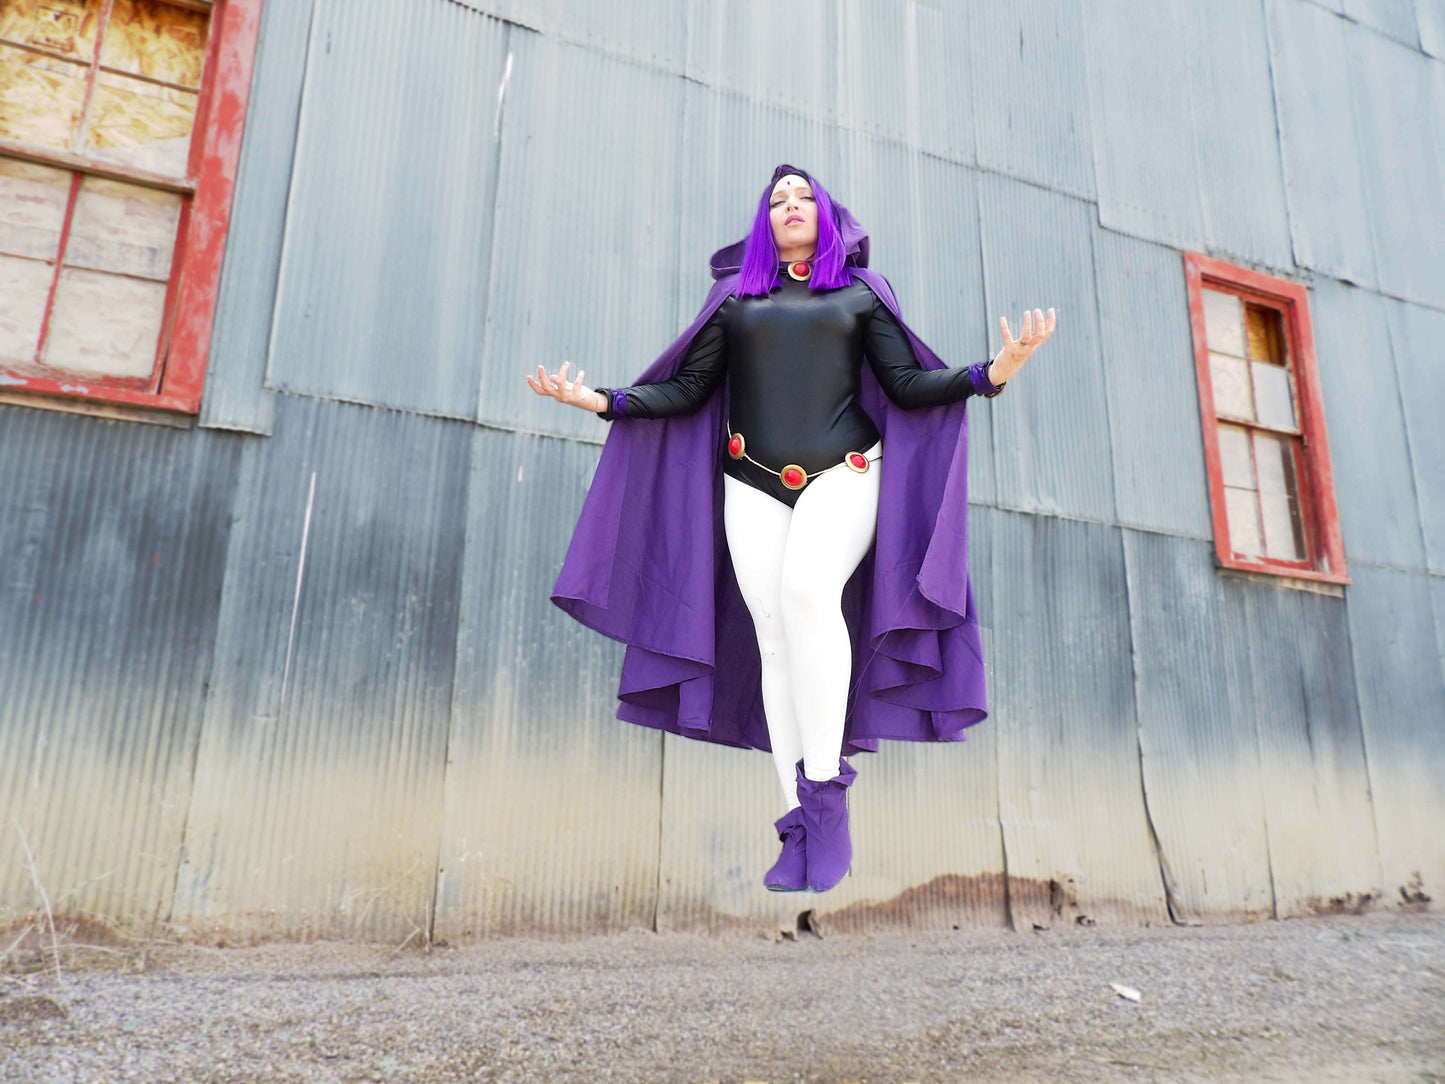 Standard Teen Titans Raven Inspired Sleek Black Bodysuit with Zipper at Back, Fitted Cape with Exaggerated Hood, and Purple Wrist Bands Cosplay Pack